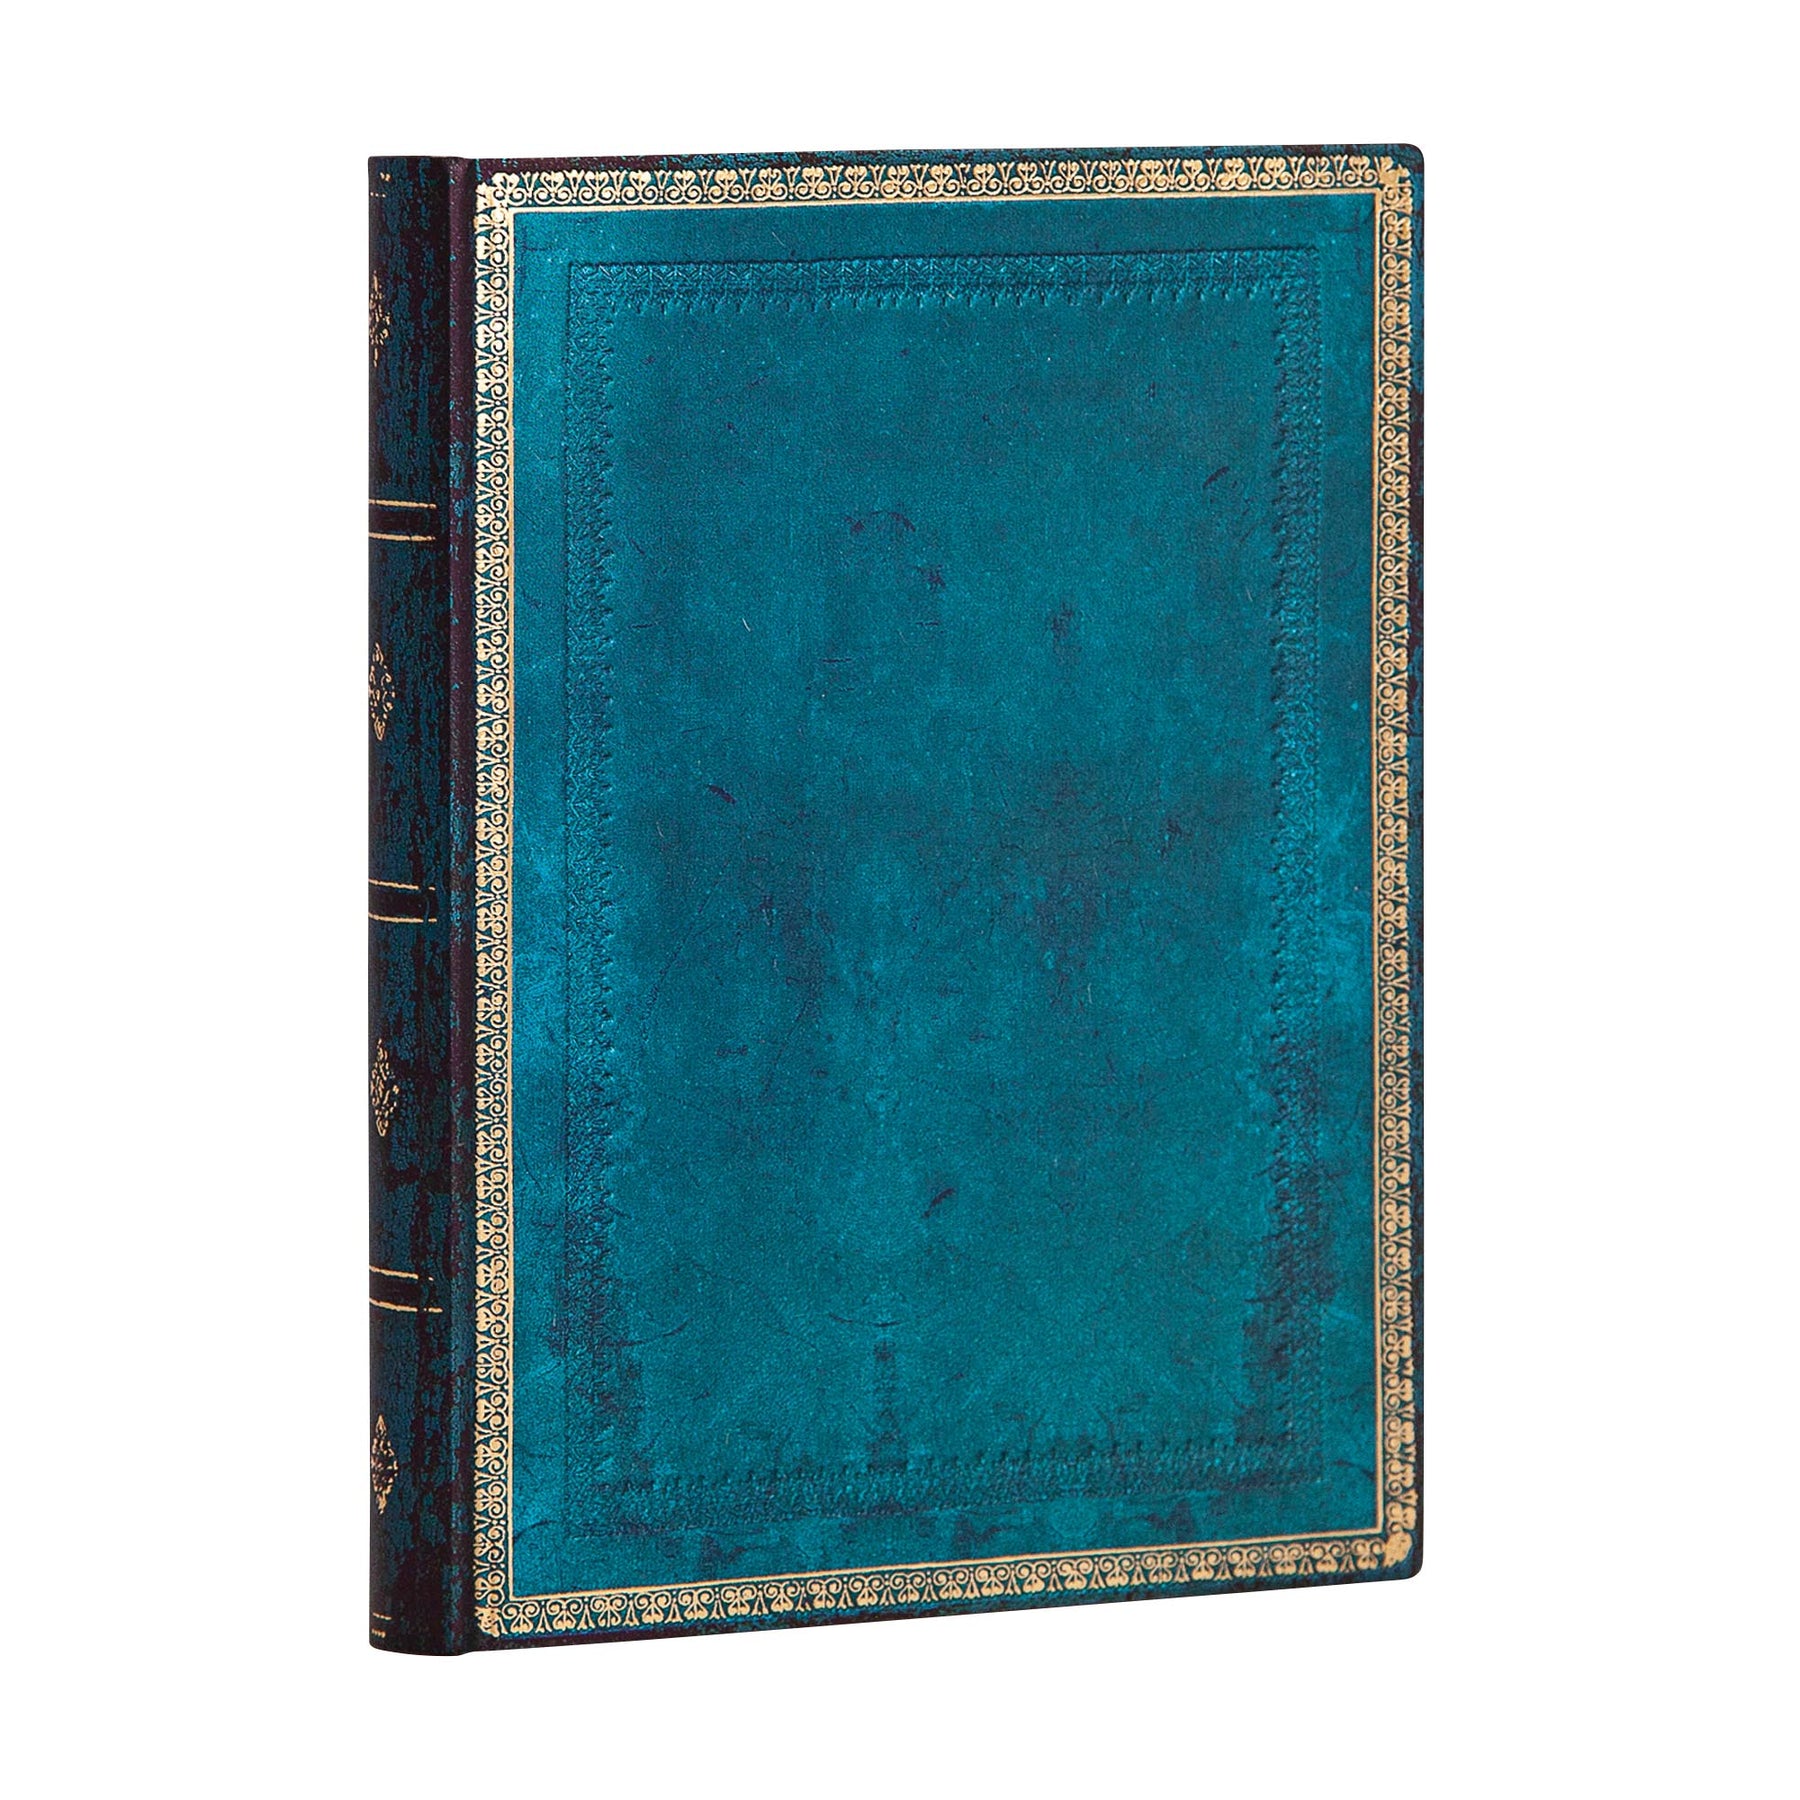 Paperblanks Flexis - Old Leather Collection Calypso Midi